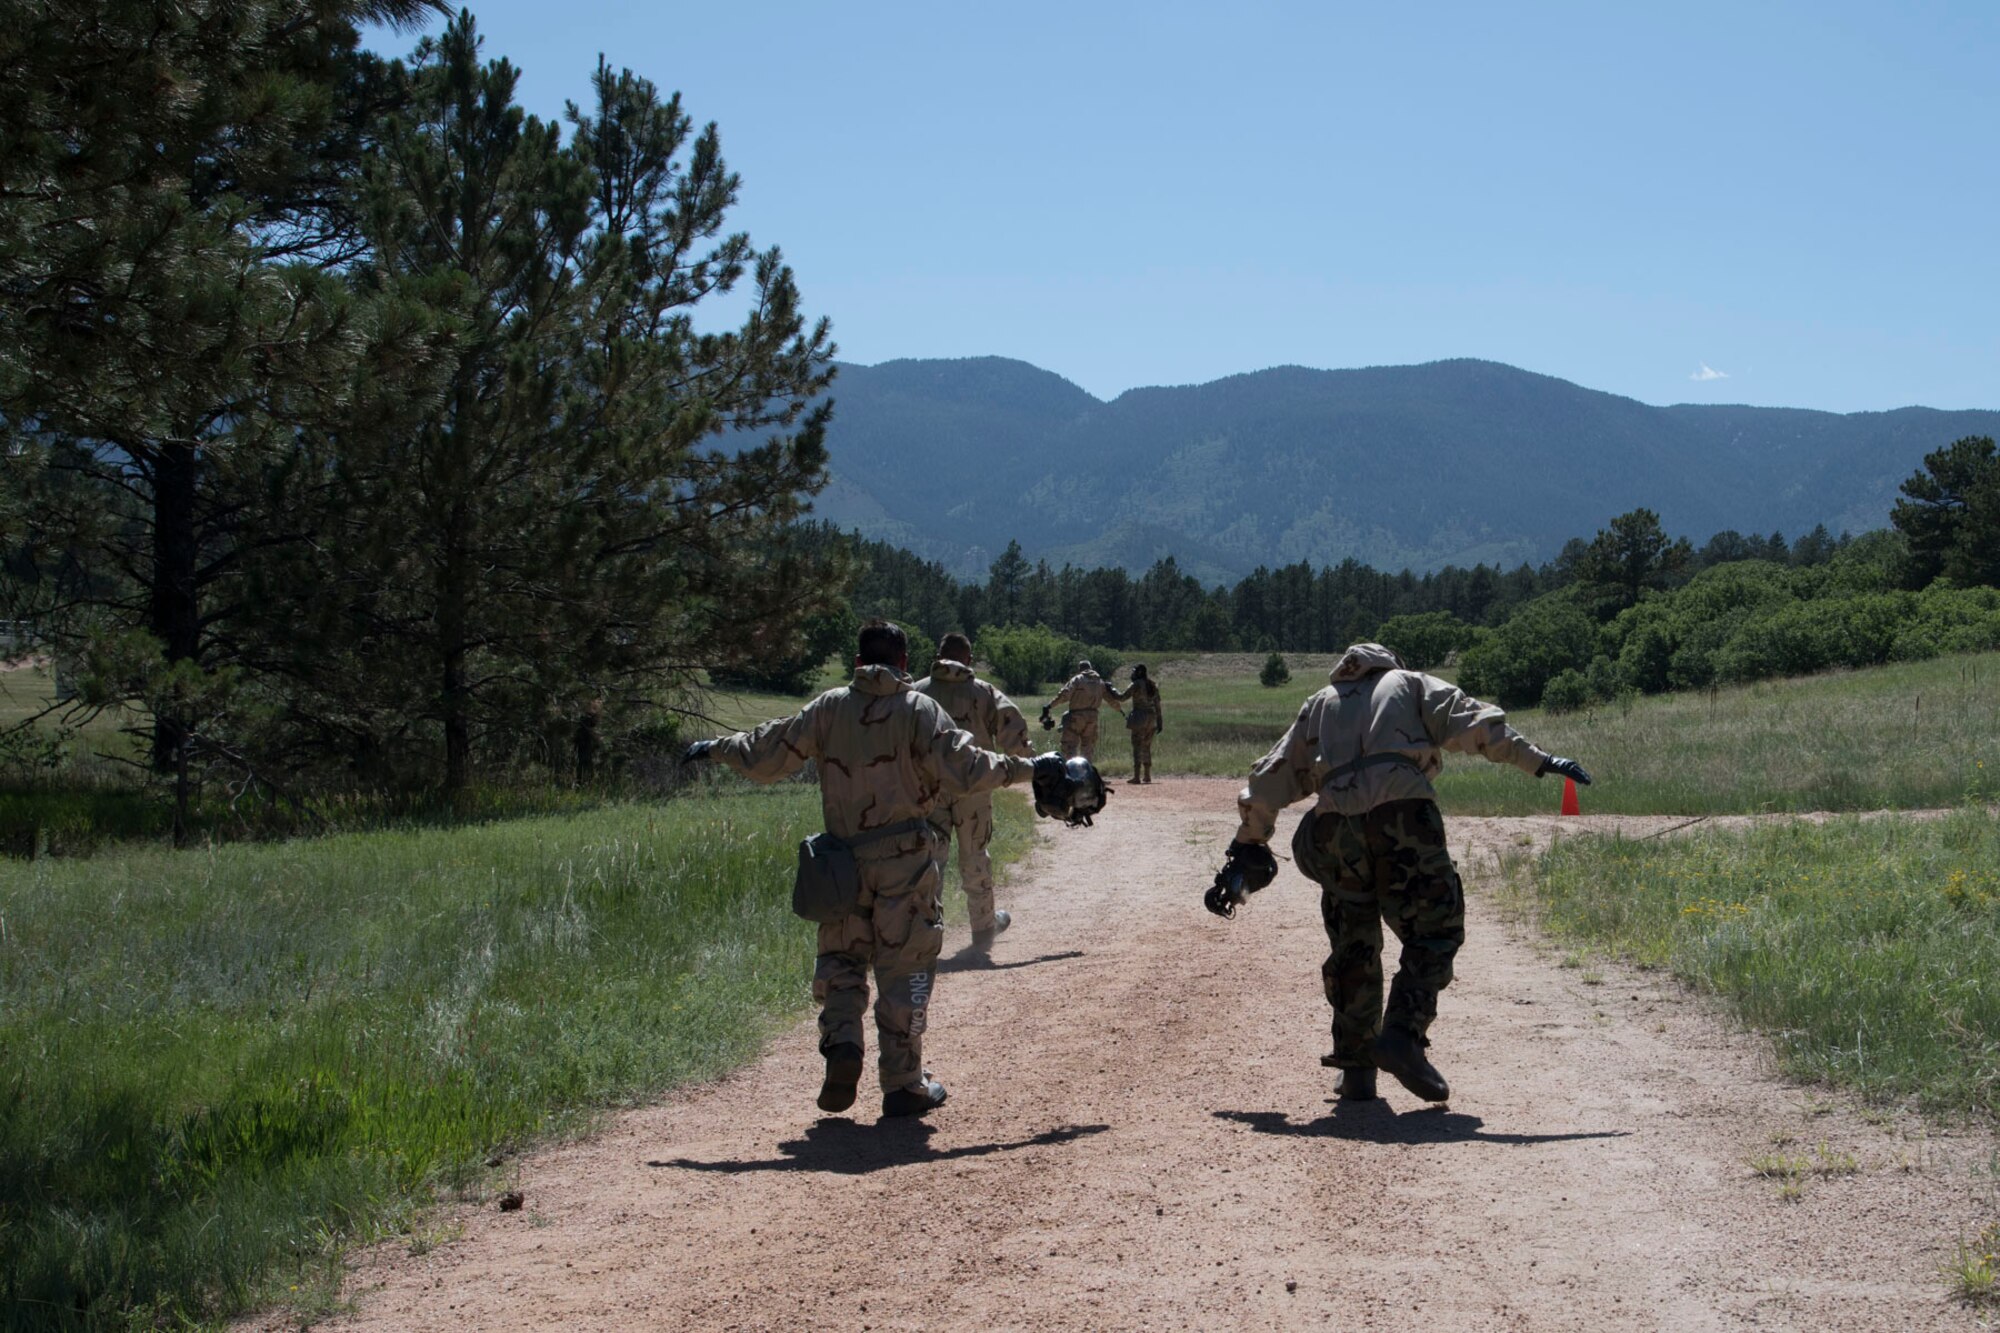 Airmen that just exited the gas chamber hold their arms out walking down a path with a mountain view horizon in the distance.